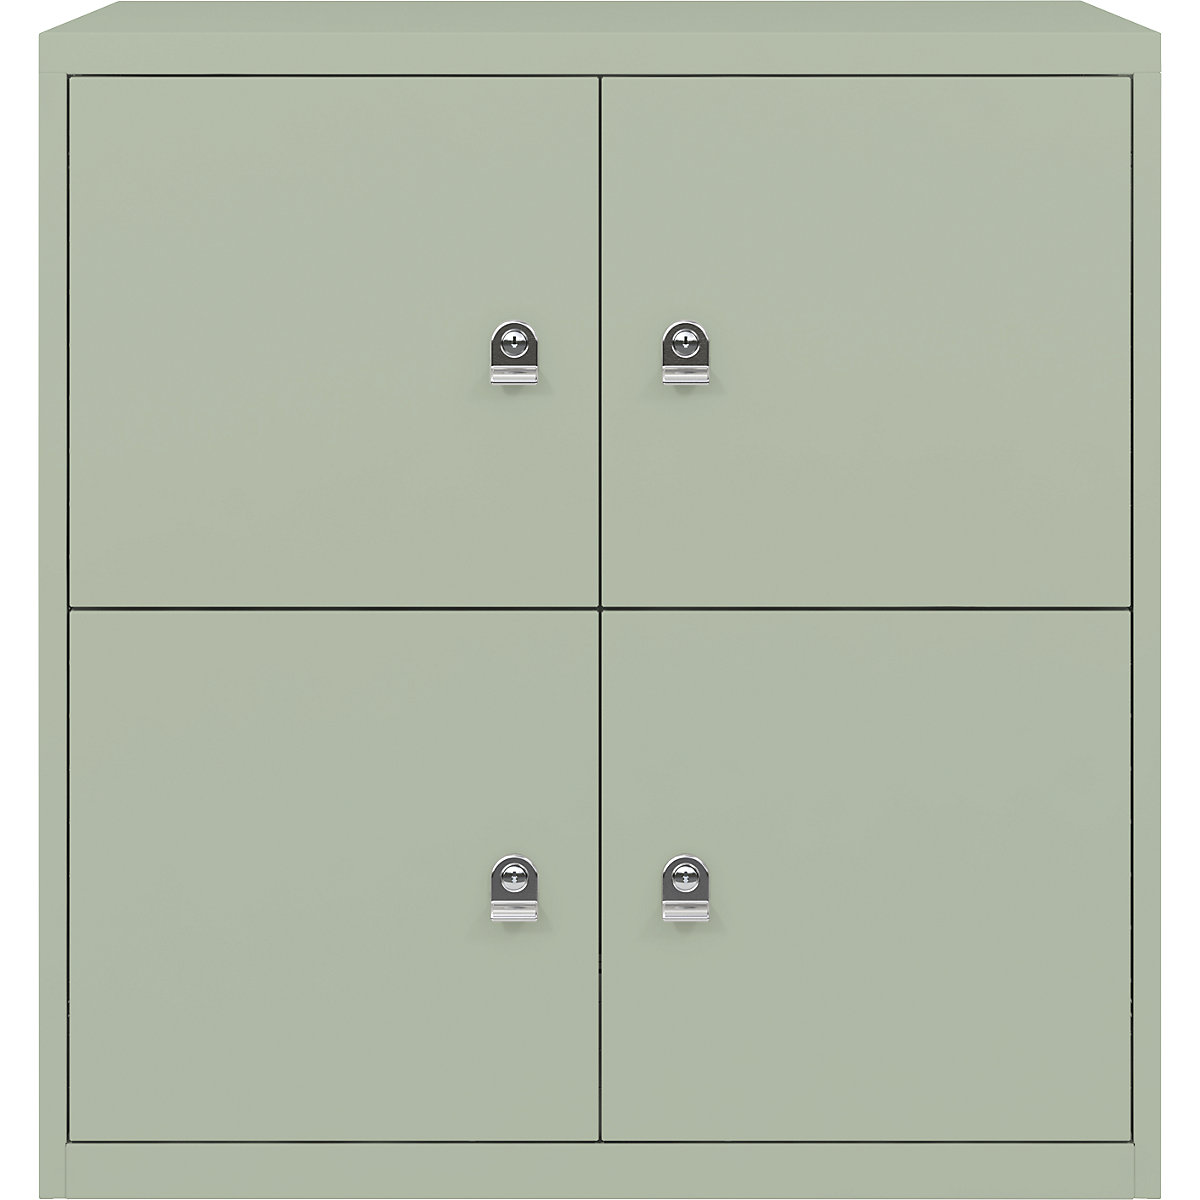 BISLEY – LateralFile™ lodge, with 4 lockable compartments, height 375 mm each, regent